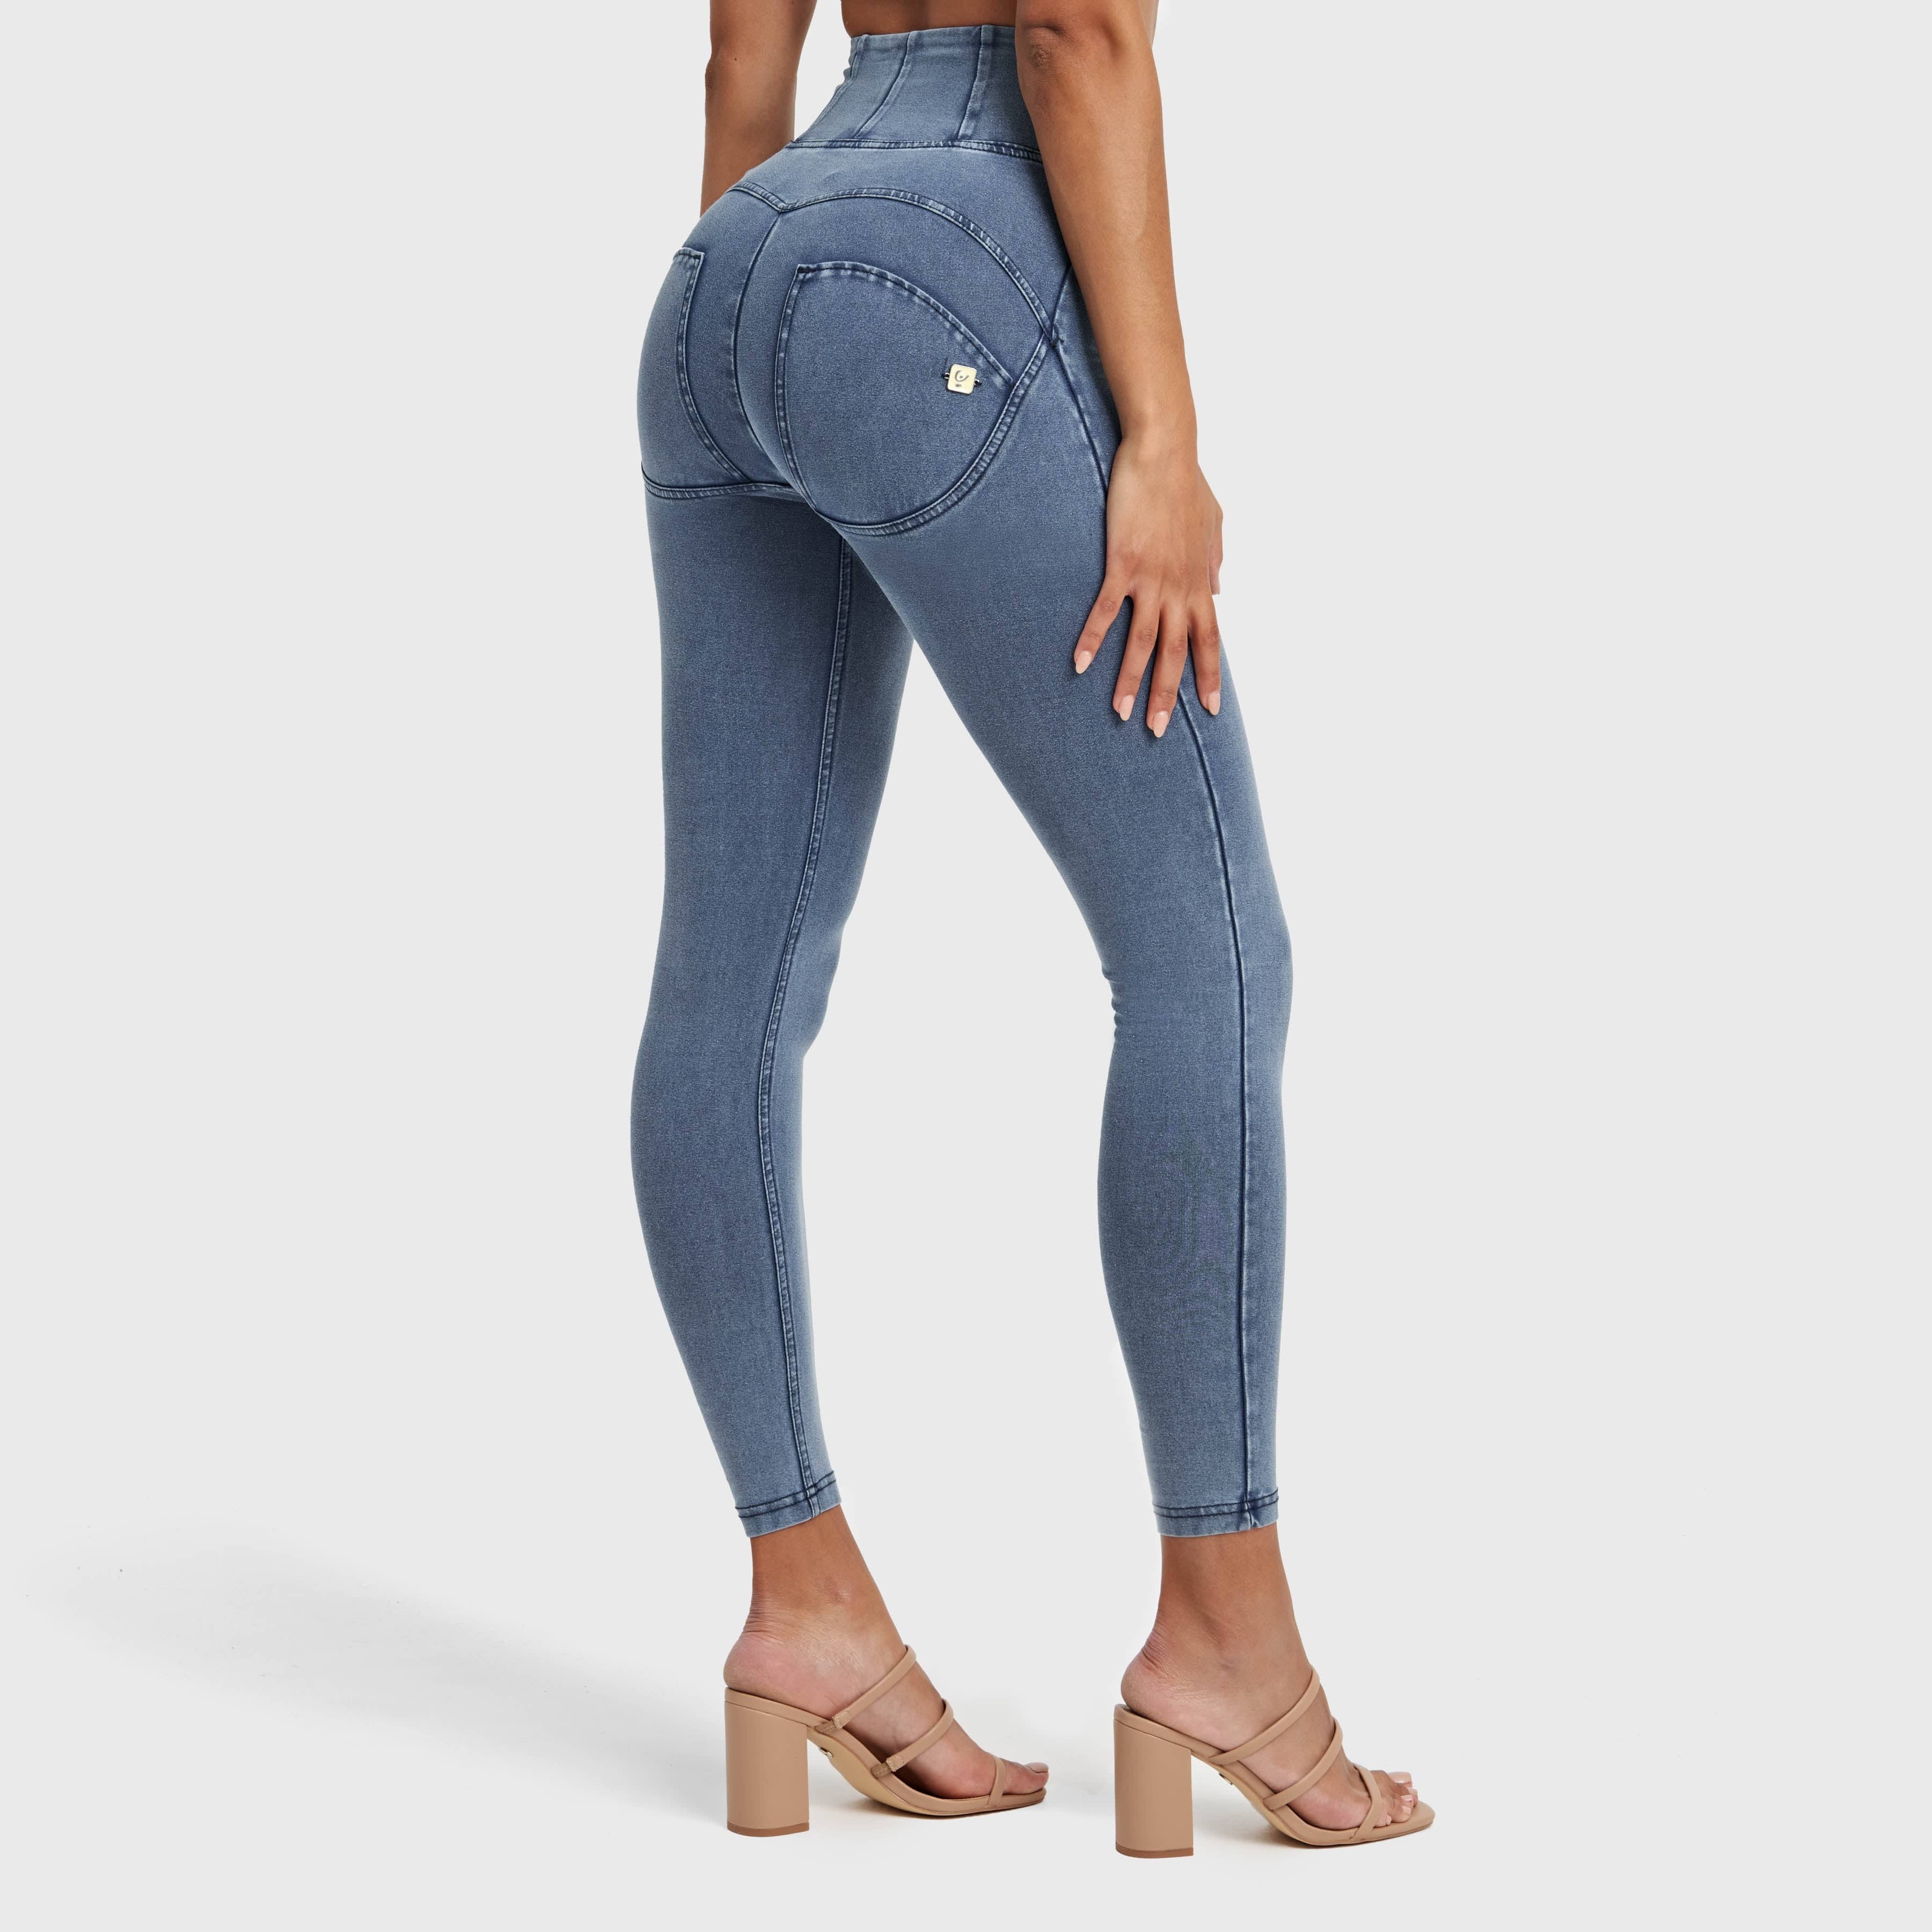 WR.UP® Denim With Front Pockets - Super High Waisted - Petite Length - Light Blue + Blue Stitching 2